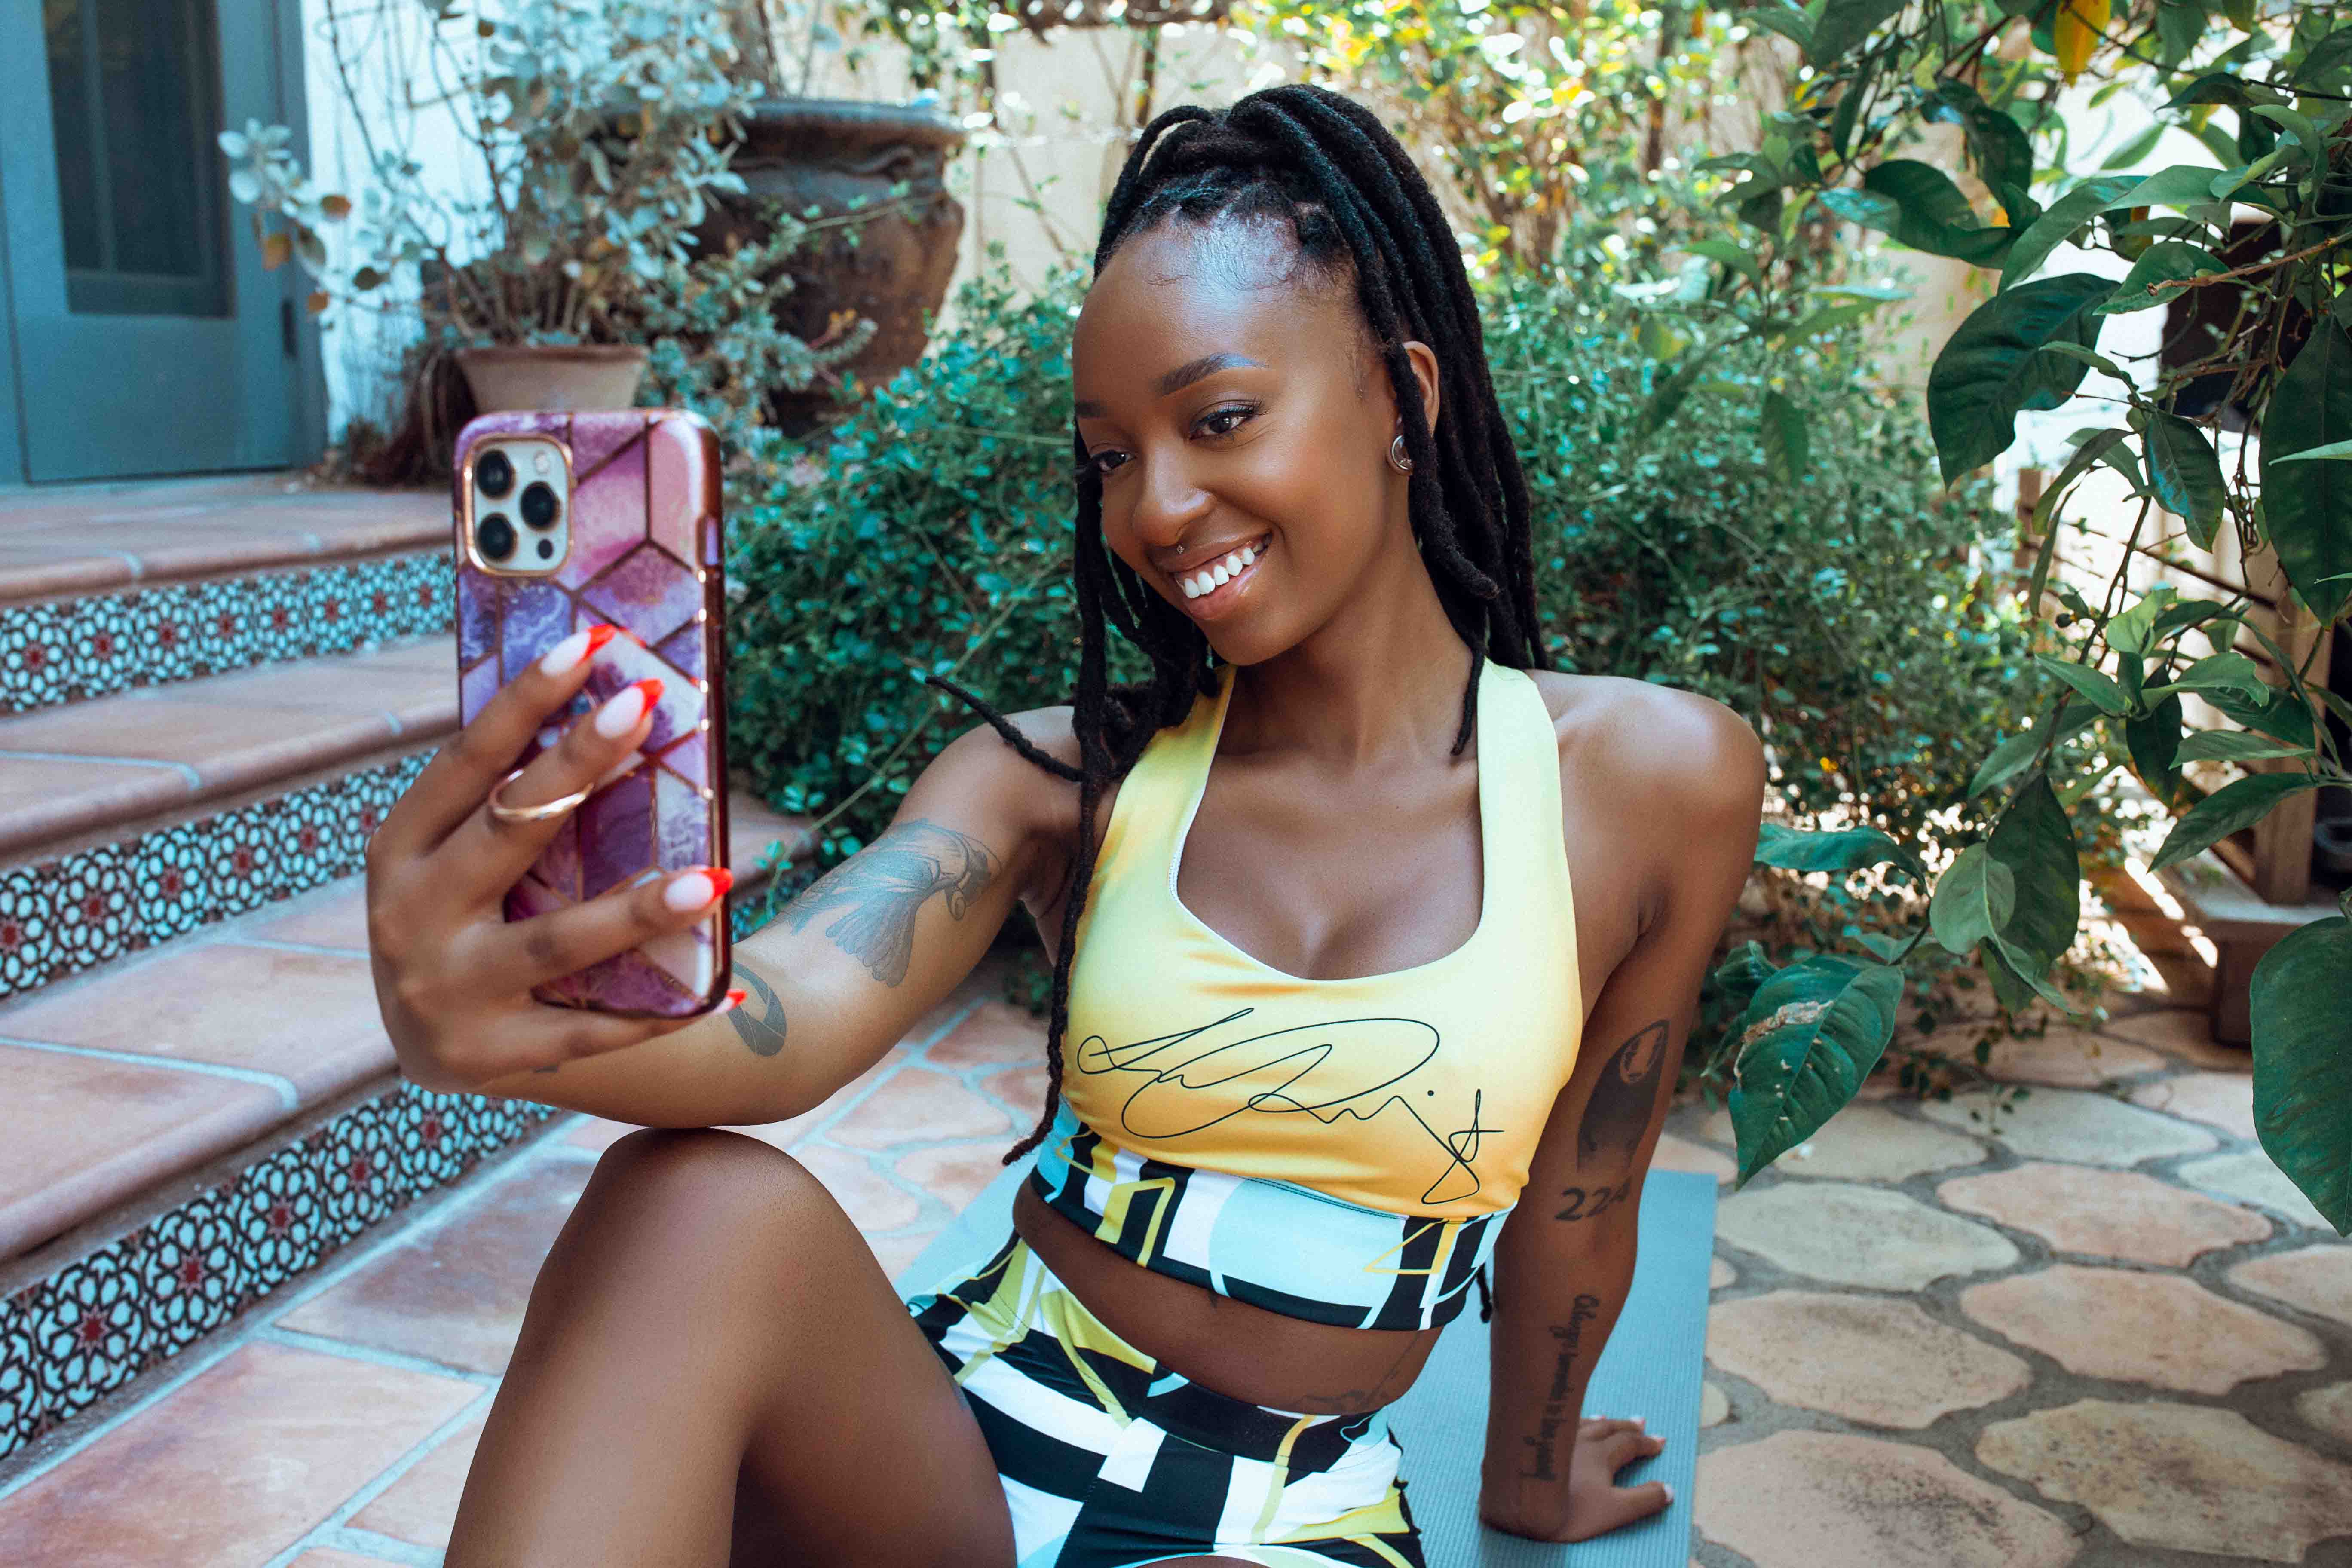 woman with long, dark cornrows pulled up into a loose ponytail, wearing a yellow sports bra with matching athletic shorts, leaning backwards on a bench posing holding her phone up in front of her to take a photo of herself in front of a botanical atmosphere next to stairs that lead to the entrance of a house